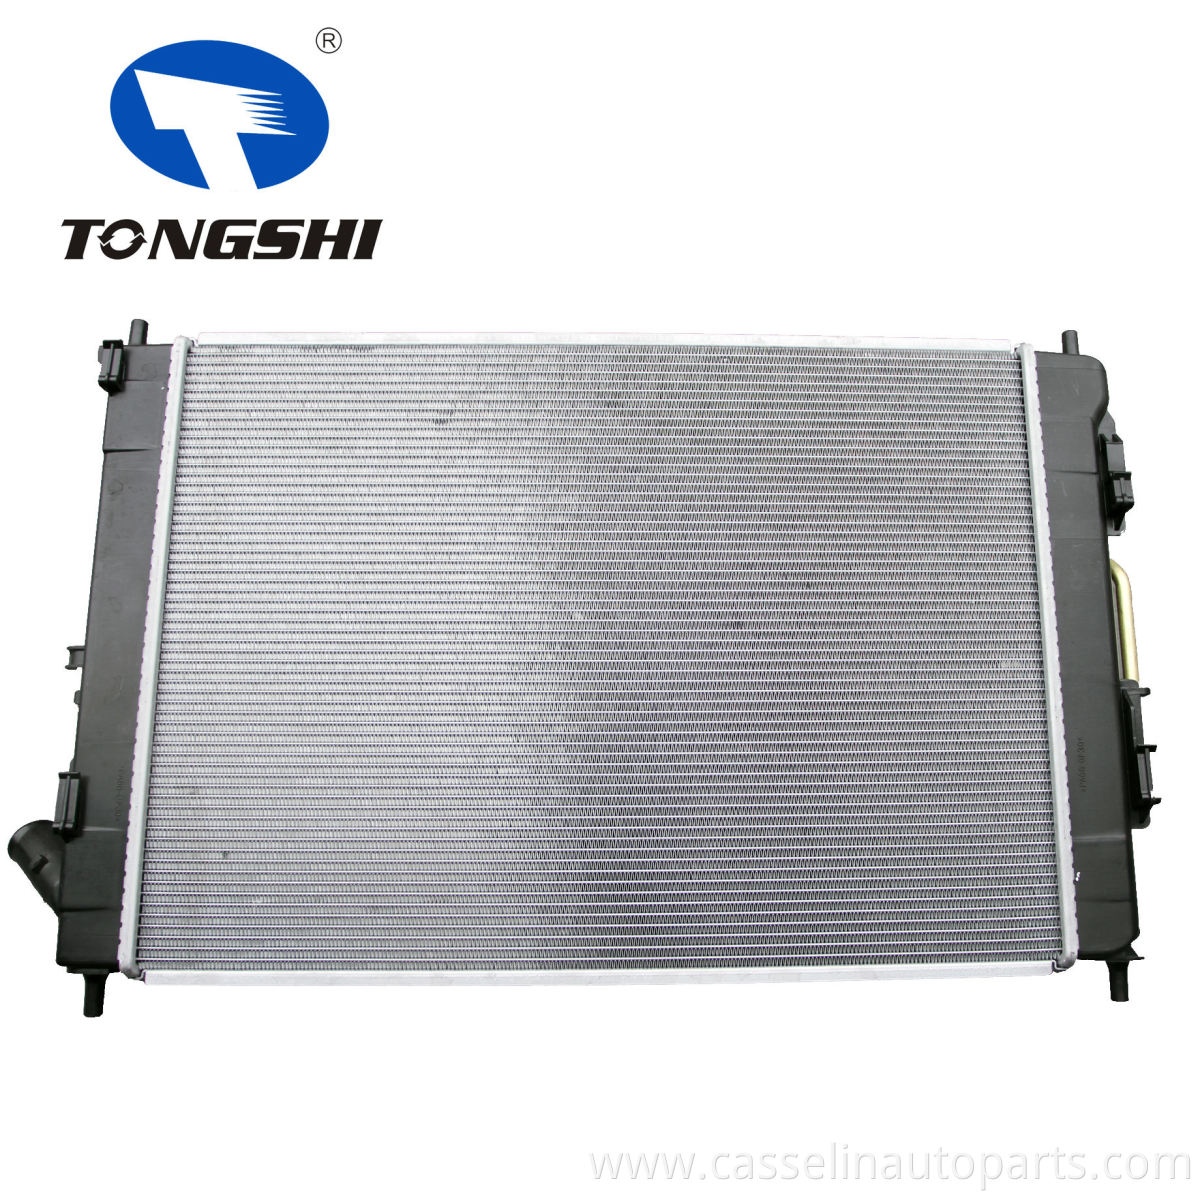 Chinese Manufacturer of Car Radiator for HY UNDAI ELENTRA 1.8l/2.0 14-15 AT OEM 253103X600 Radiator